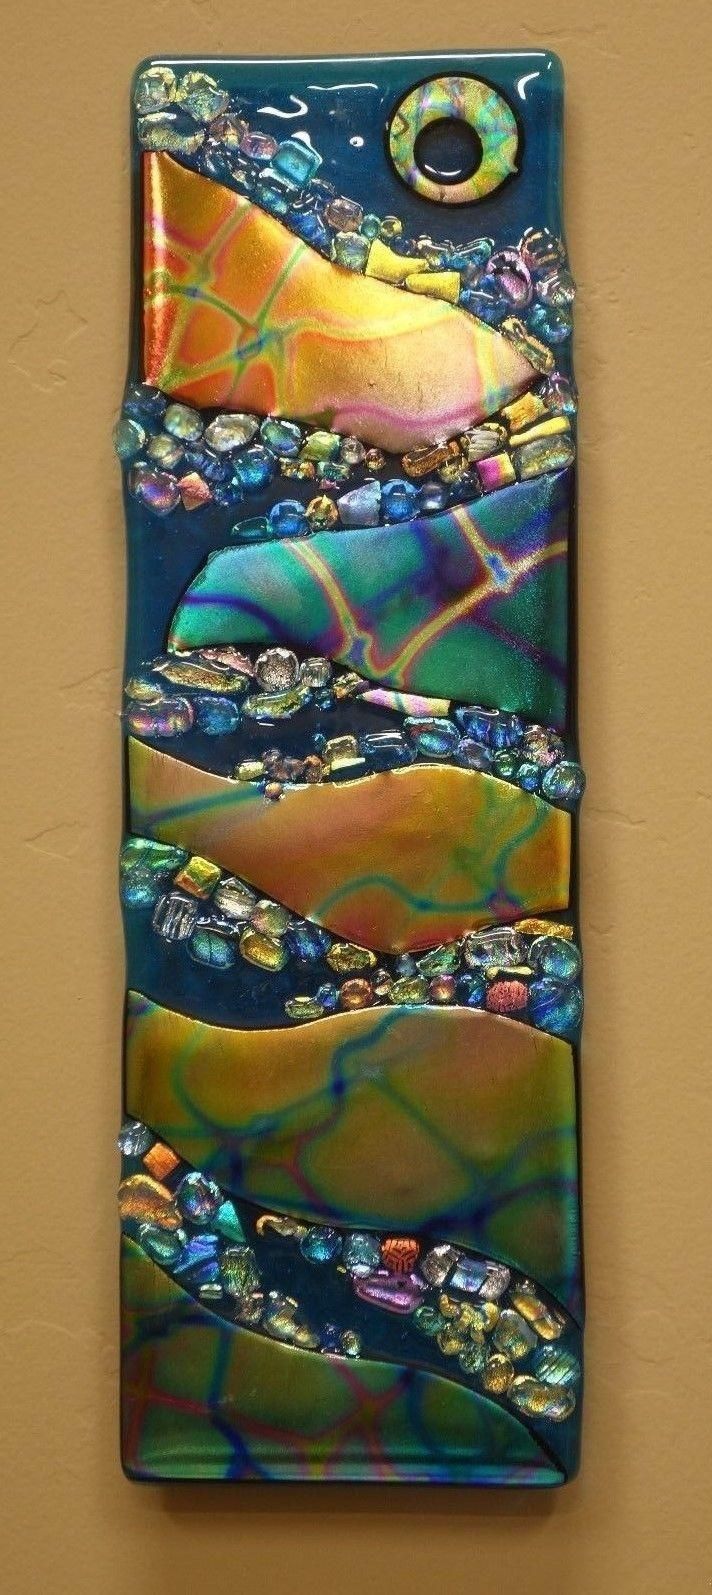 1599 Best Fusing Images On Pinterest | Fused Glass, Glass Art And Pertaining To Fused Glass Fish Wall Art (View 7 of 20)